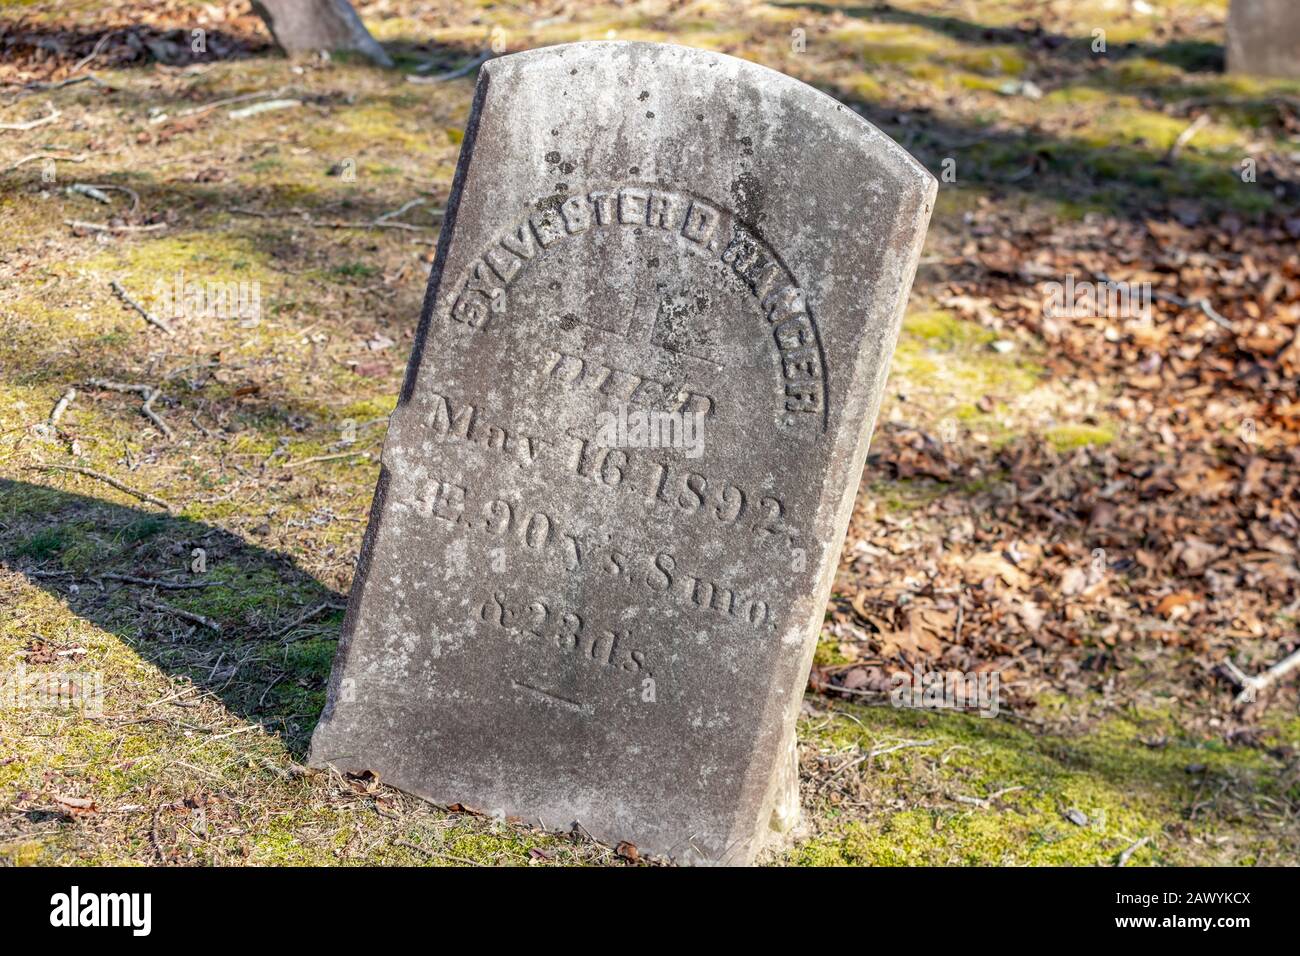 tomb stone for Sylvester D. Ranger in East Hampton, NY Stock Photo